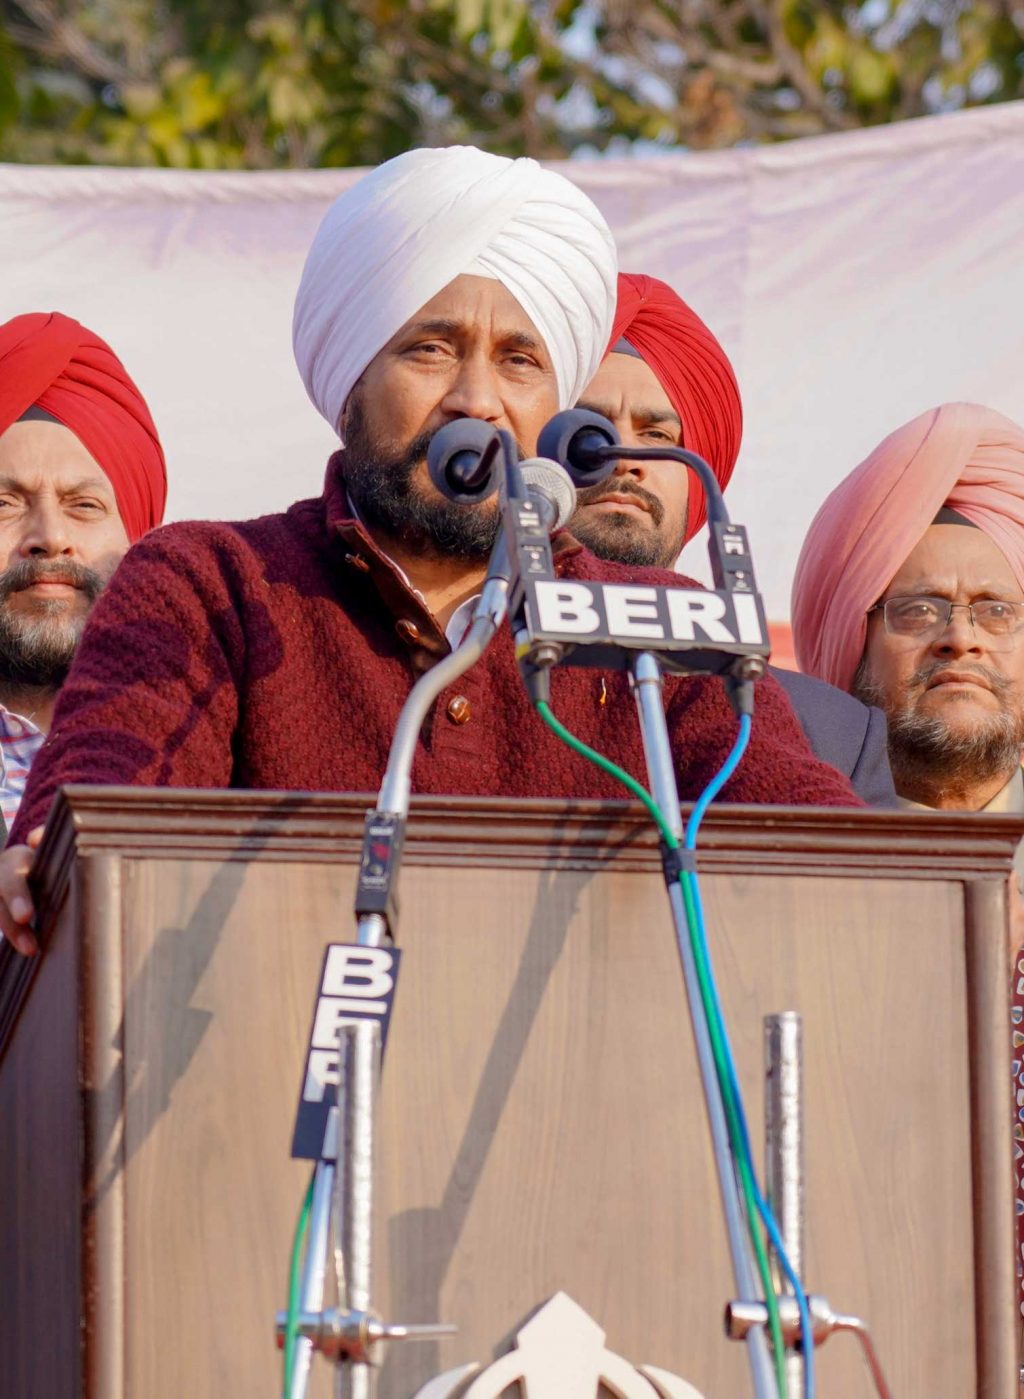 punjab cm lays foundation stone of slew of development works worth rs. 16 crore in urban estate